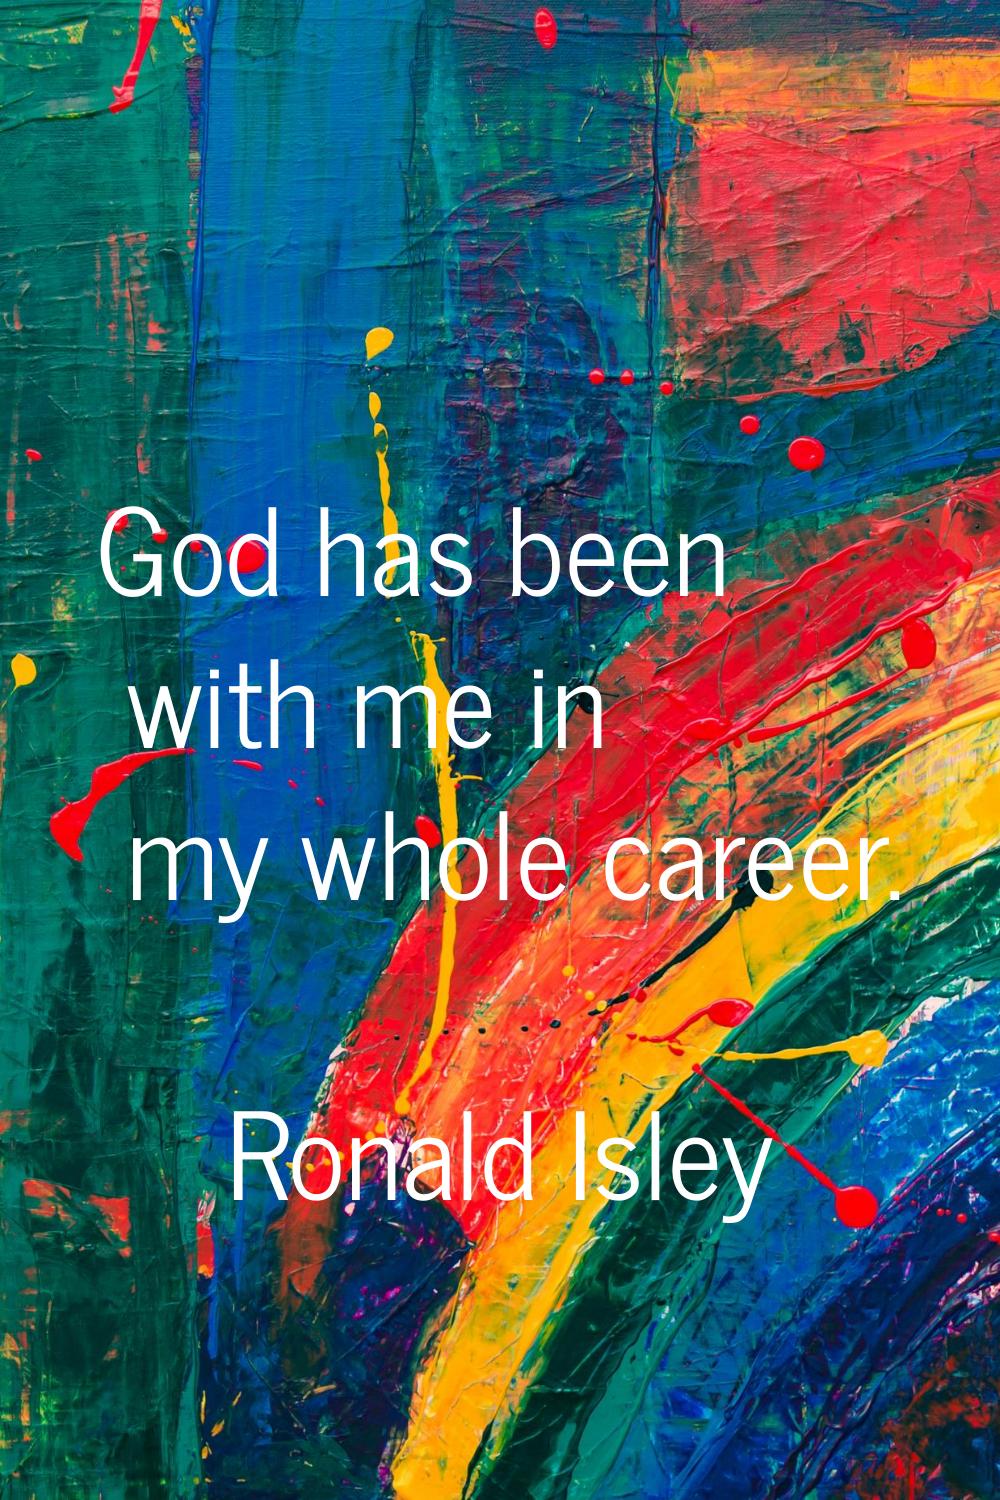 God has been with me in my whole career.